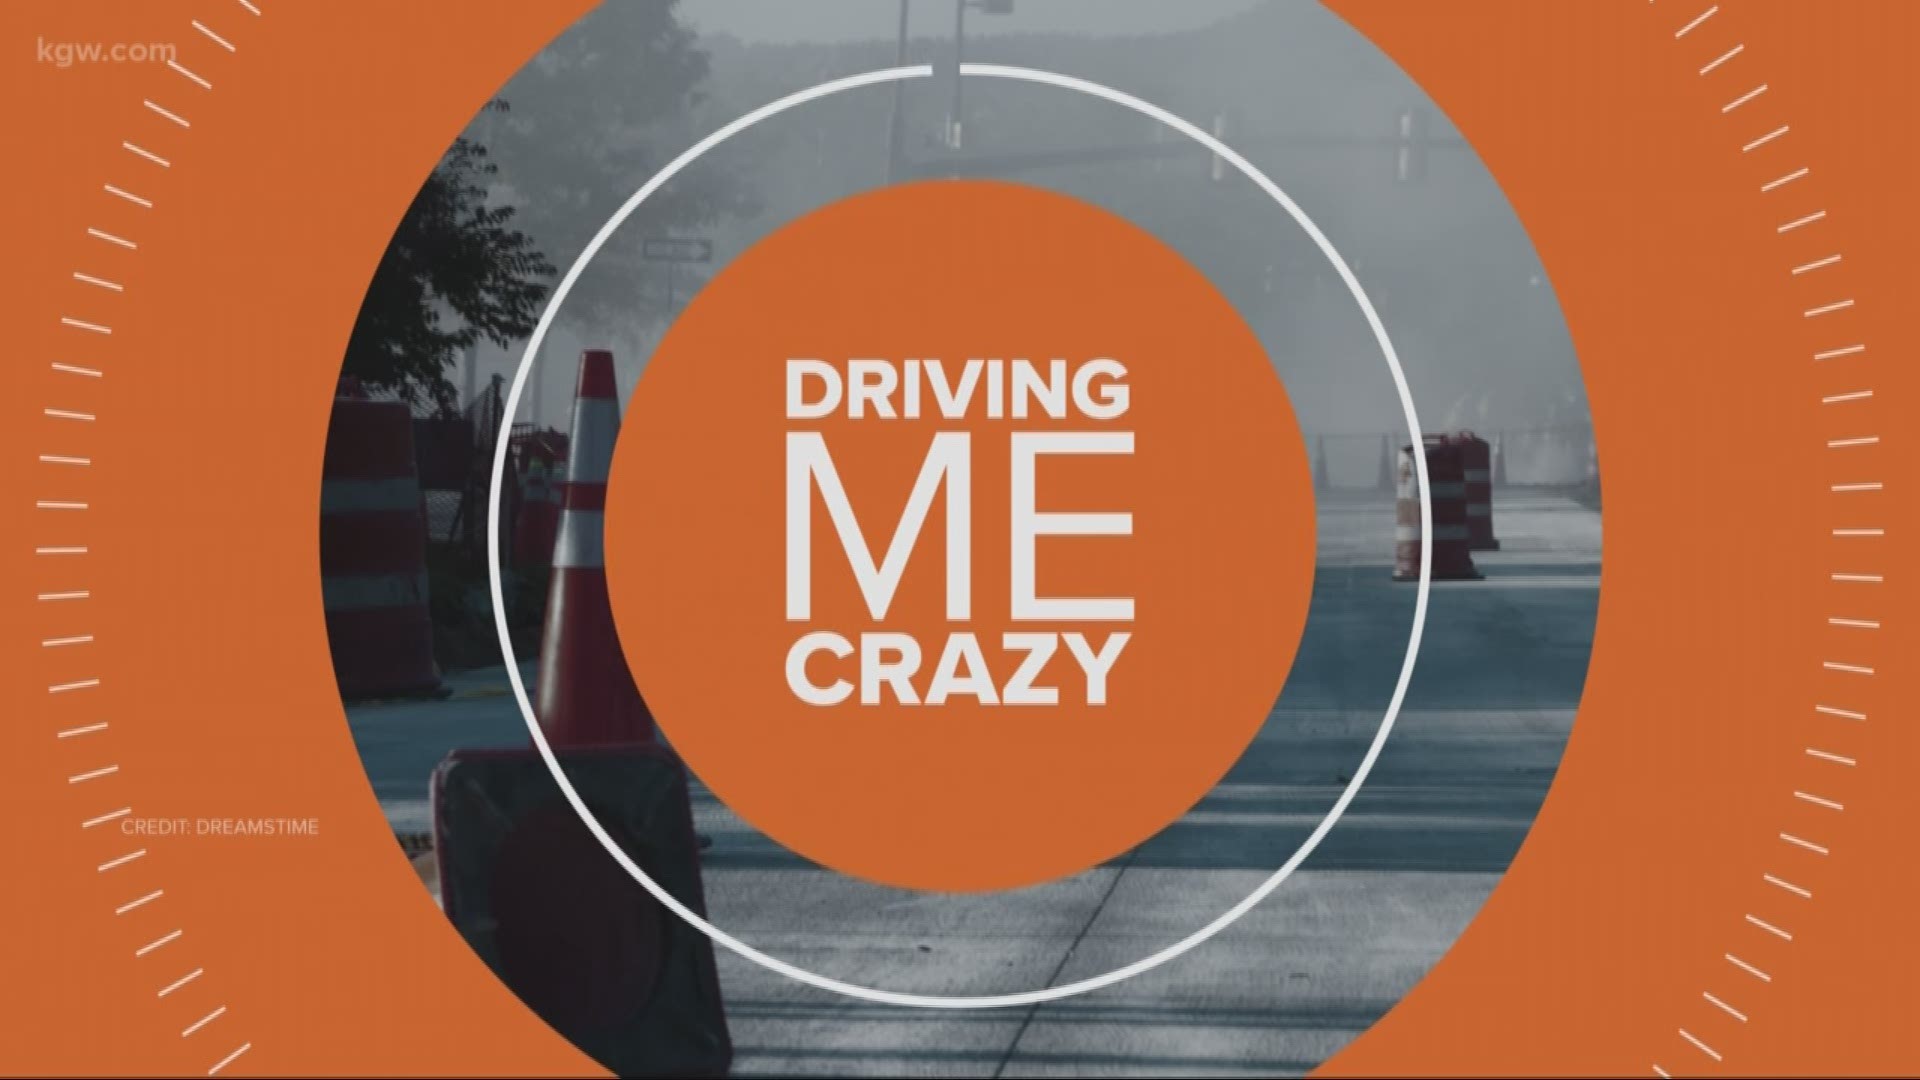 Chris McGinness is back with another edition of Driving Me Crazy.